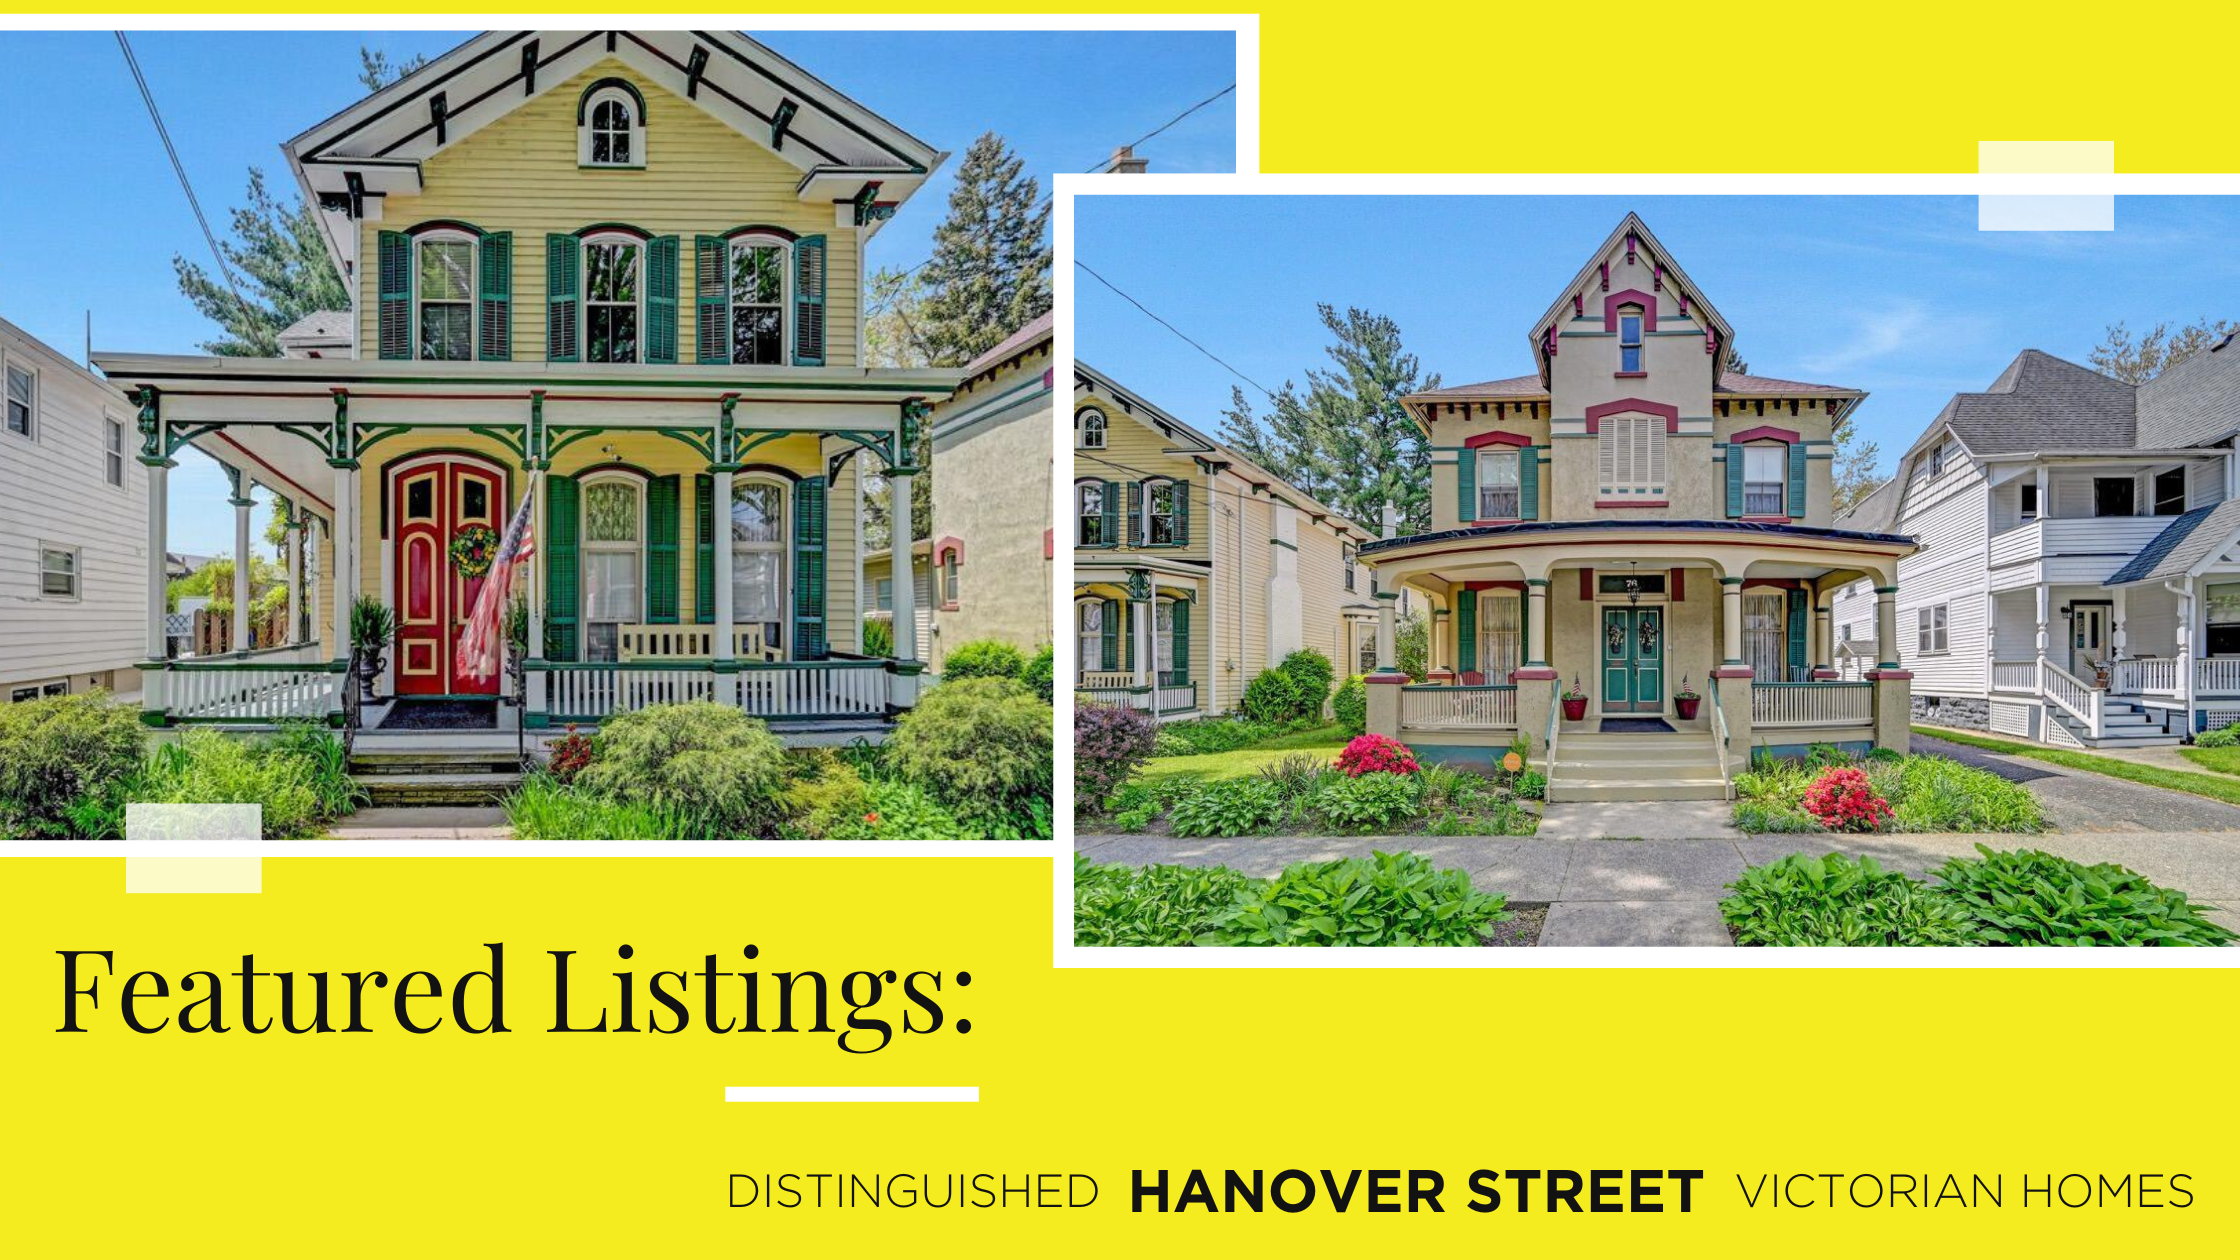 Lewith & Freeman Featured Listings: Distinguished Hanover Street Victorian Homes